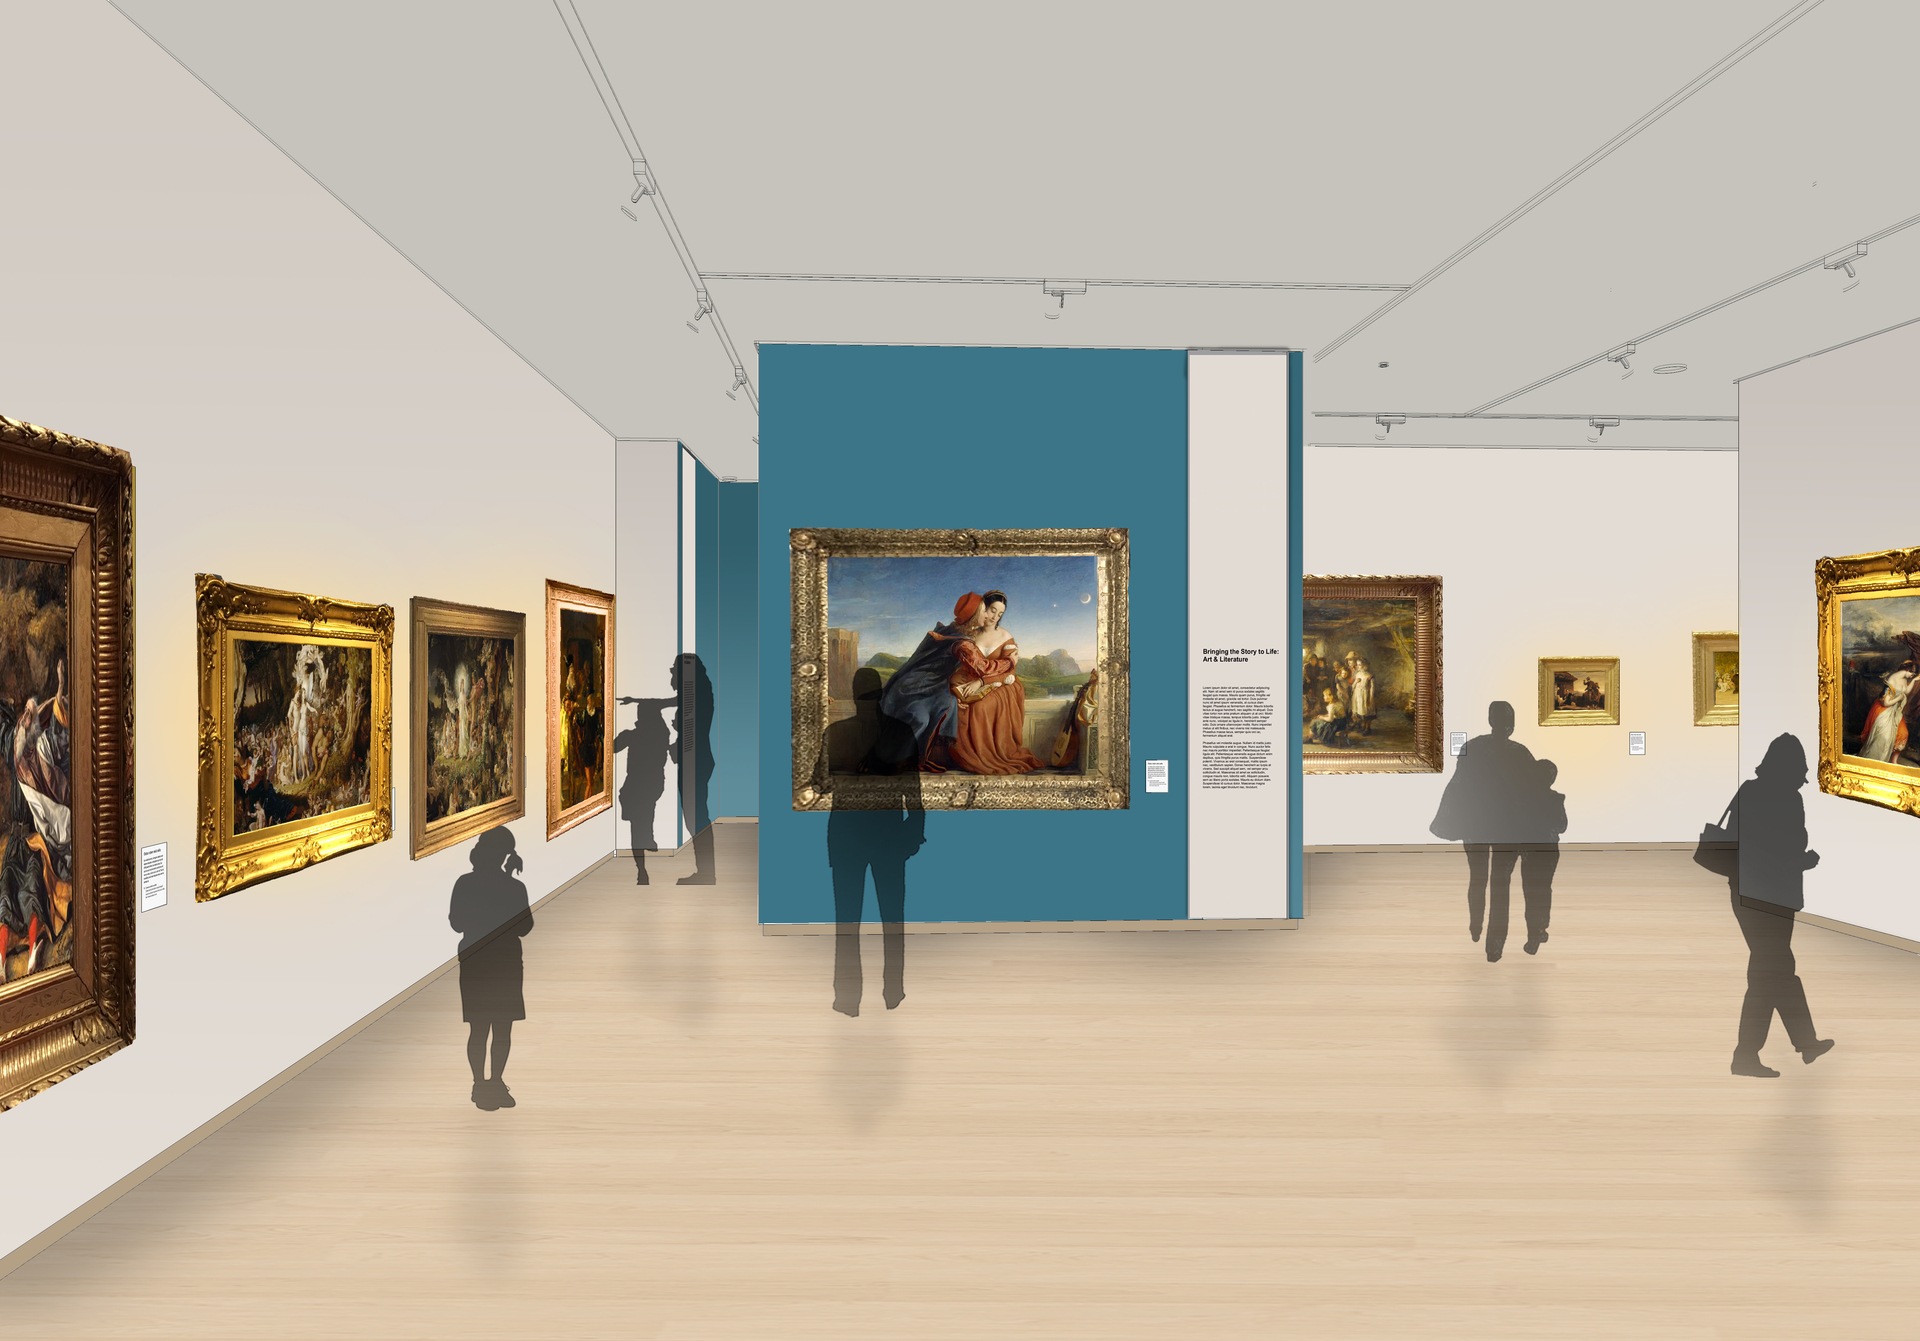 An artist's impression of the new gallery space